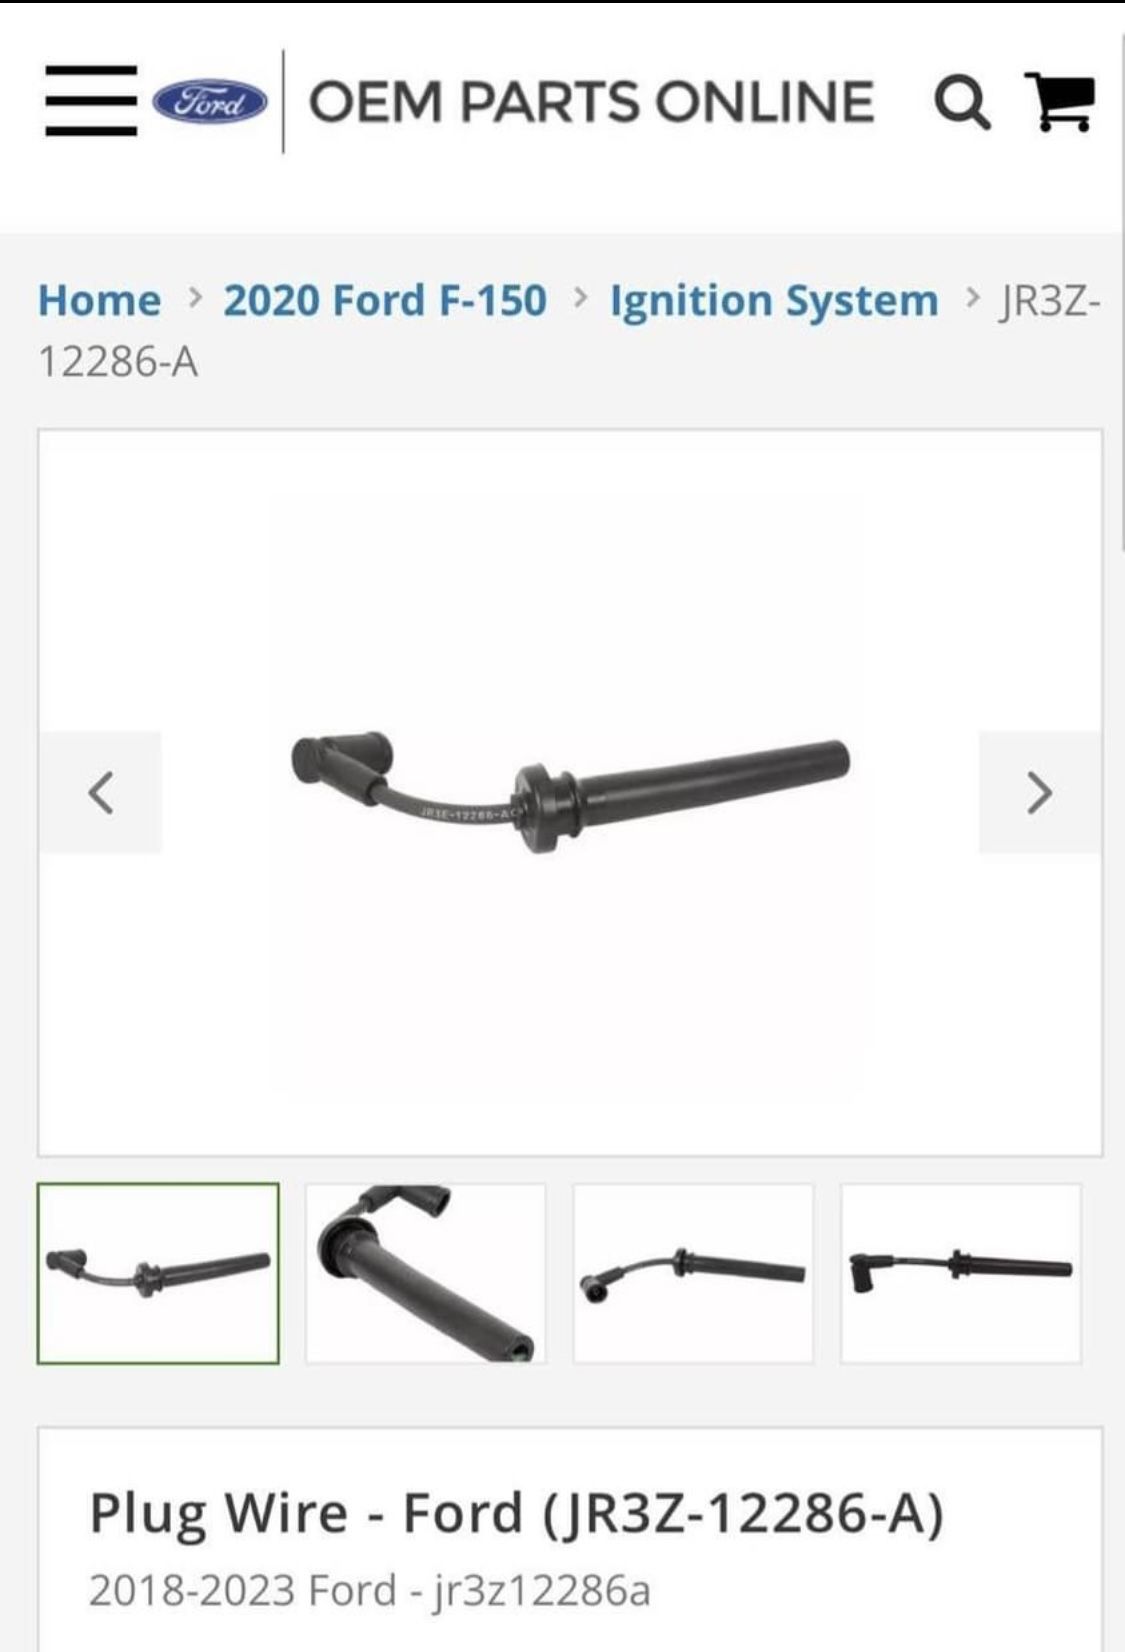 Ford Plug Wire for 5.0  